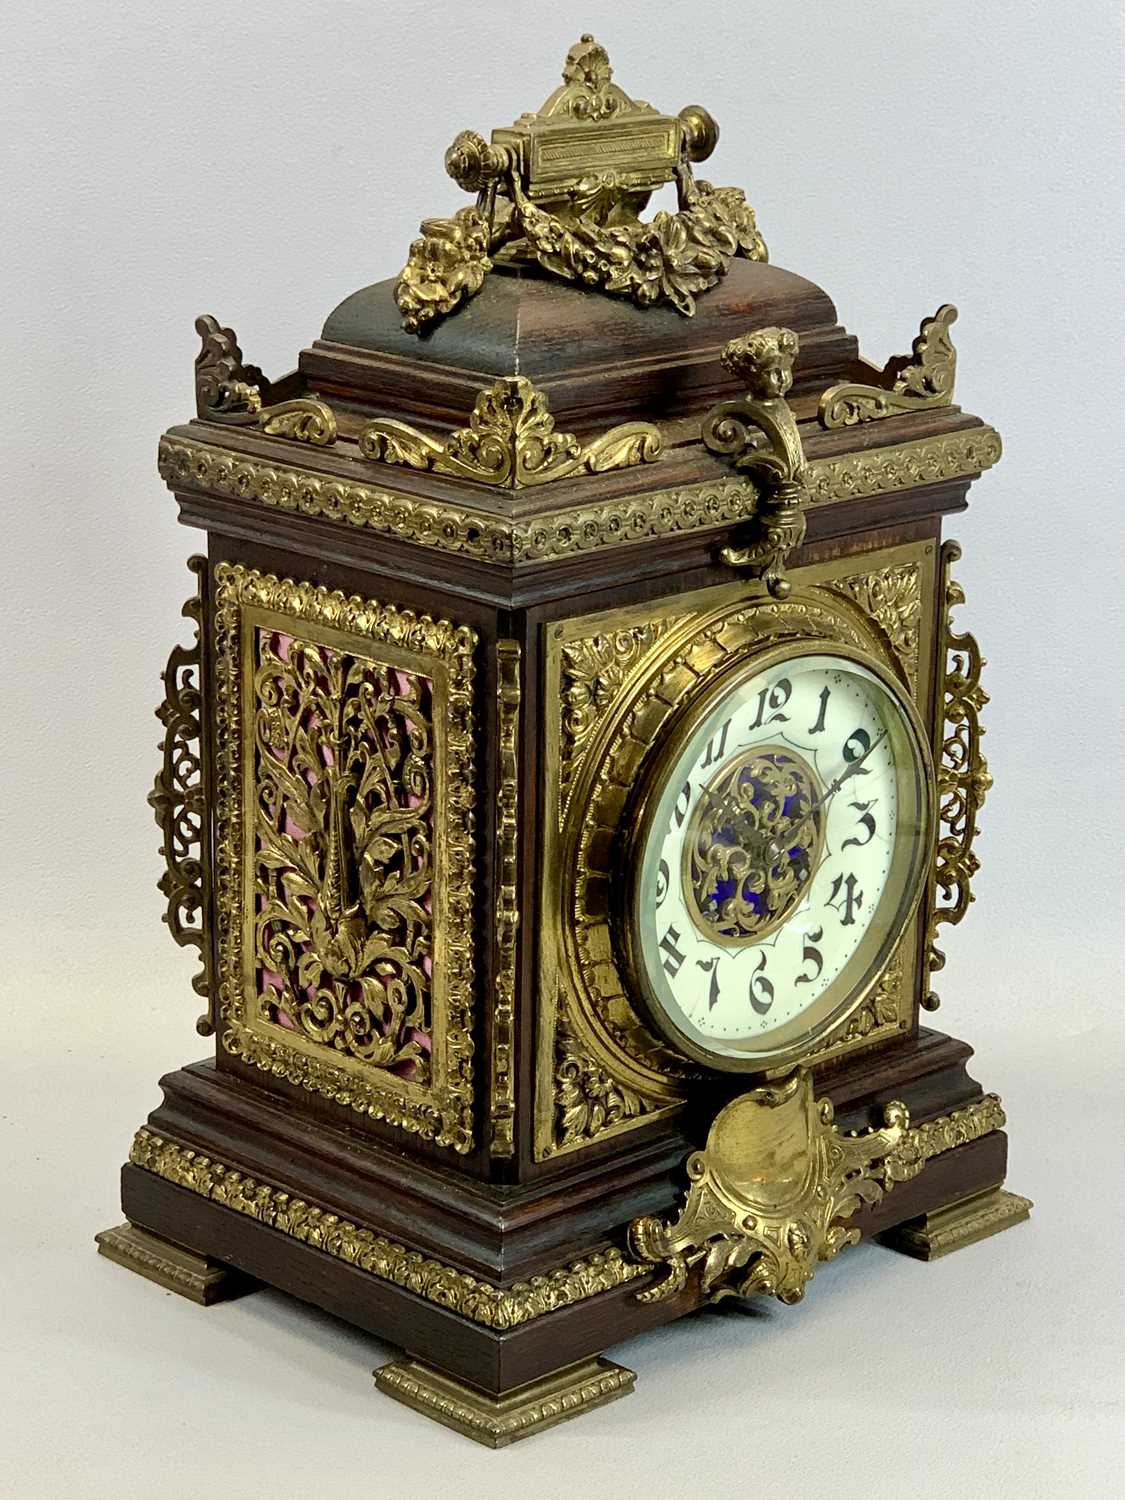 A FRENCH OAK & GILDED ORMOLU MOUNTED MANTEL CLOCK - late 19th Century, cream ceramic dial with black - Image 2 of 5